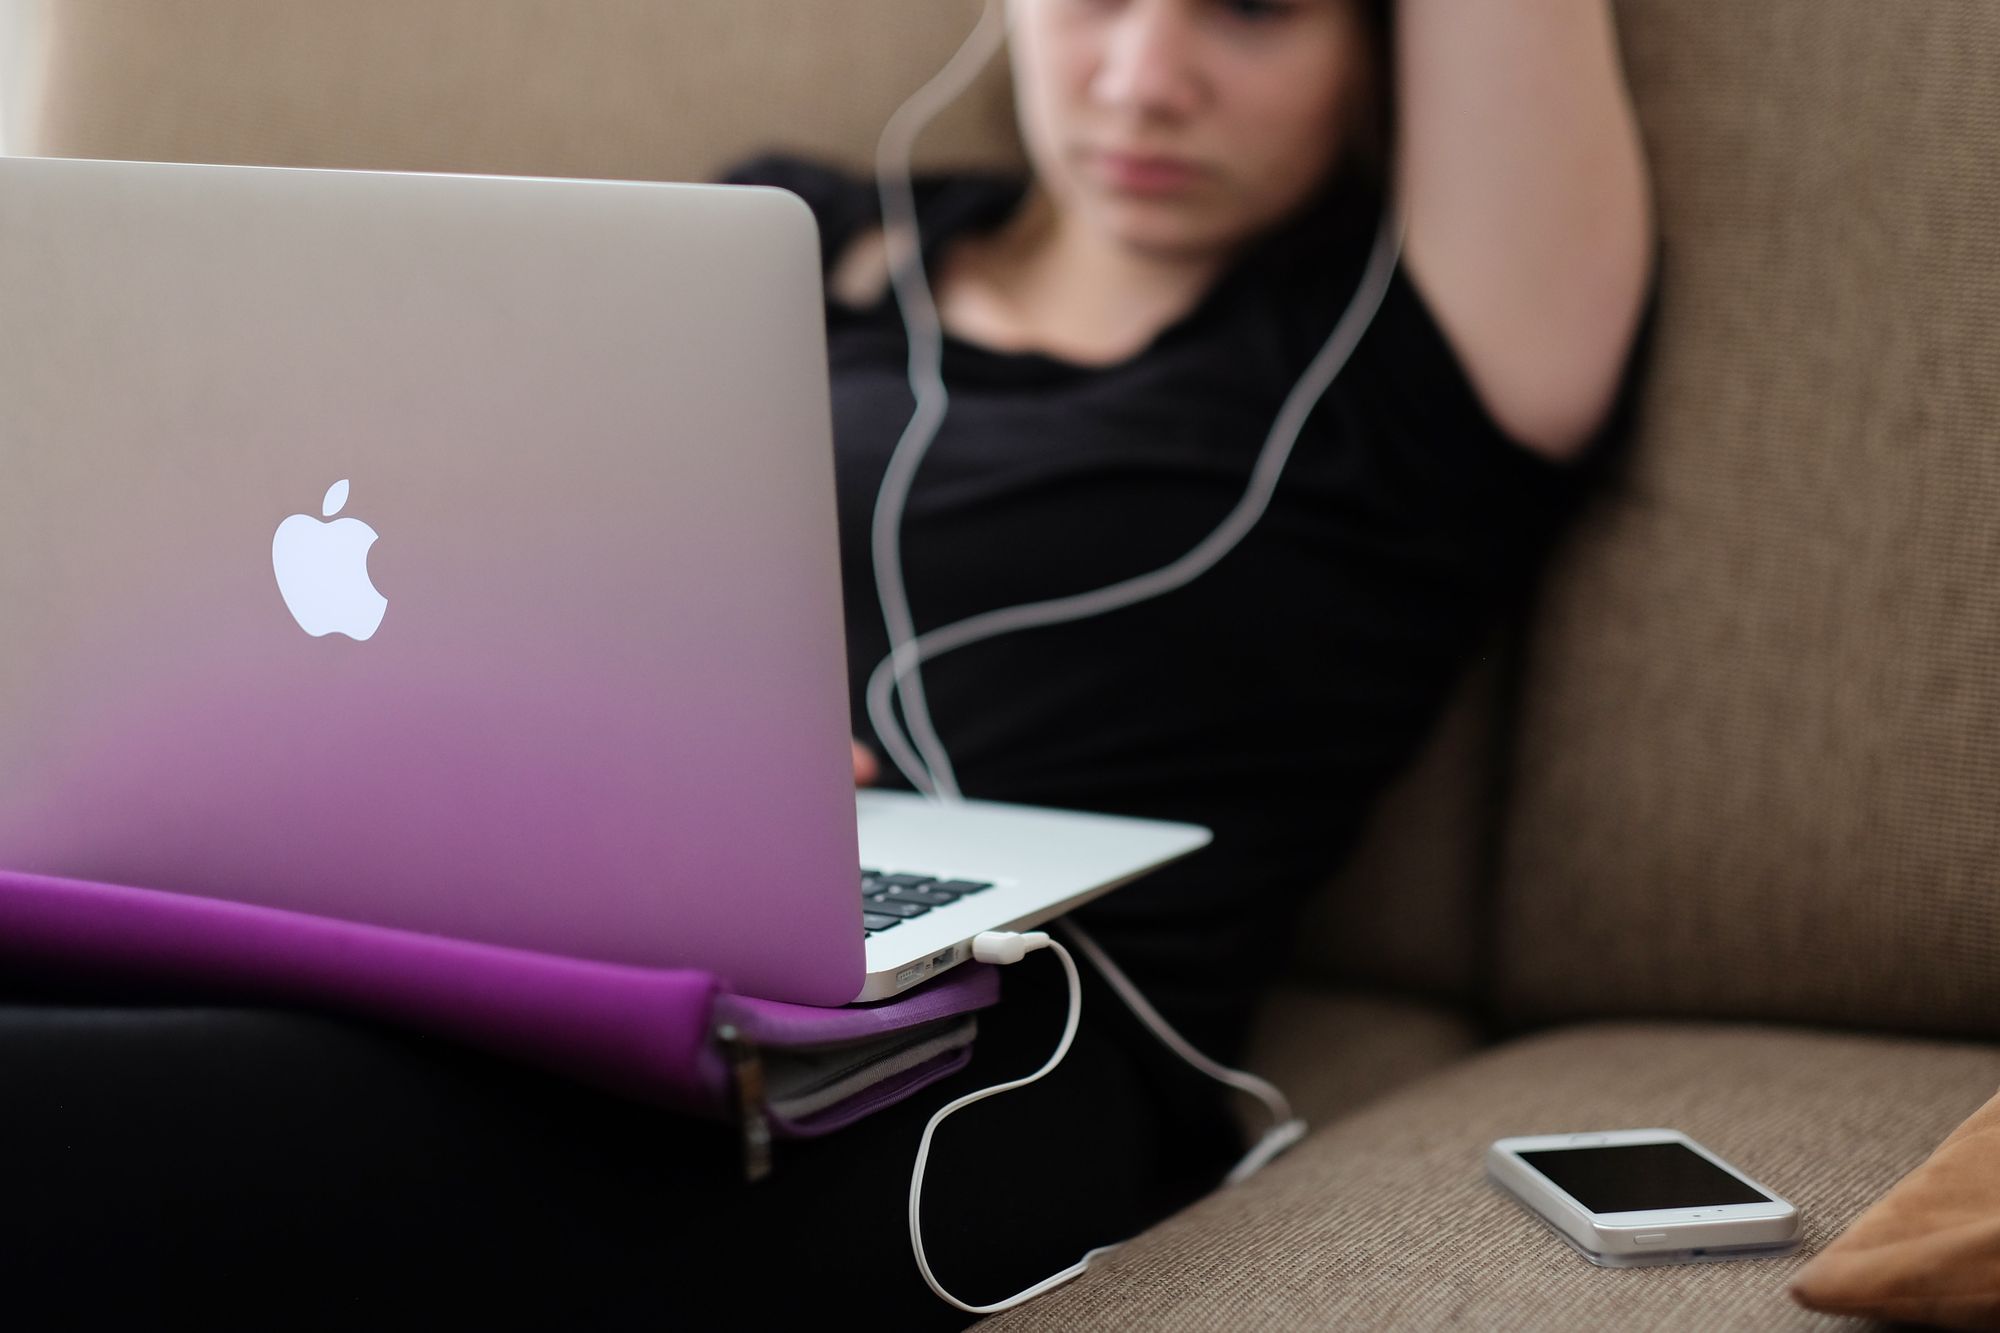 A teen sits alone on the sofa, watching porn on her laptop with her headphones in.